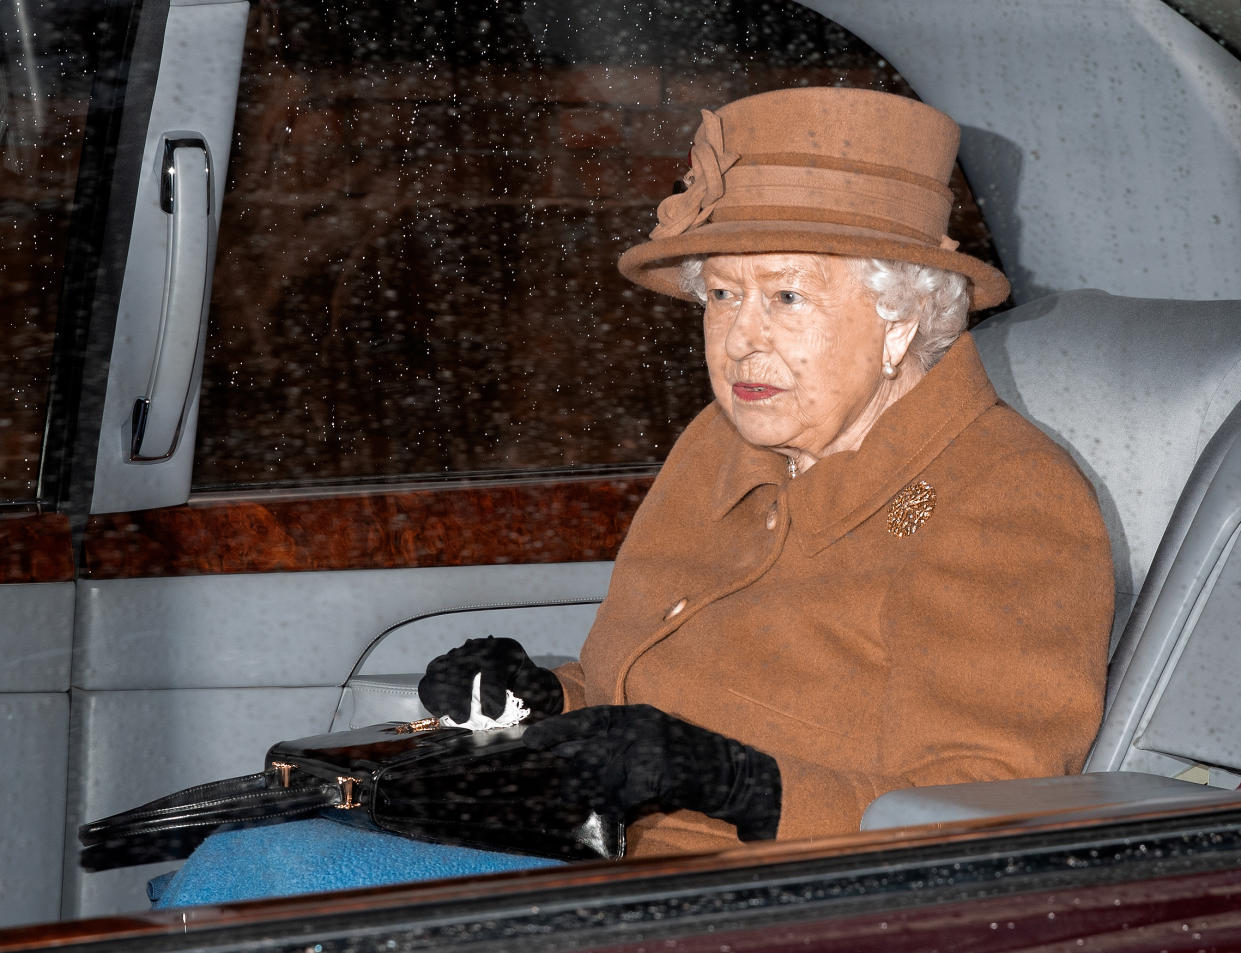 KING'S LYNN, UNITED KINGDOM - JANUARY 12: (EMBARGOED FOR PUBLICATION IN UK NEWSPAPERS UNTIL 24 HOURS AFTER CREATE DATE AND TIME) Queen Elizabeth II departs in her Bentley car after attending Sunday service at the Church of St Mary Magdalene on the Sandringham estate on January 12, 2020 in King's Lynn, England. (Photo by Max Mumby/Indigo/Getty Images)